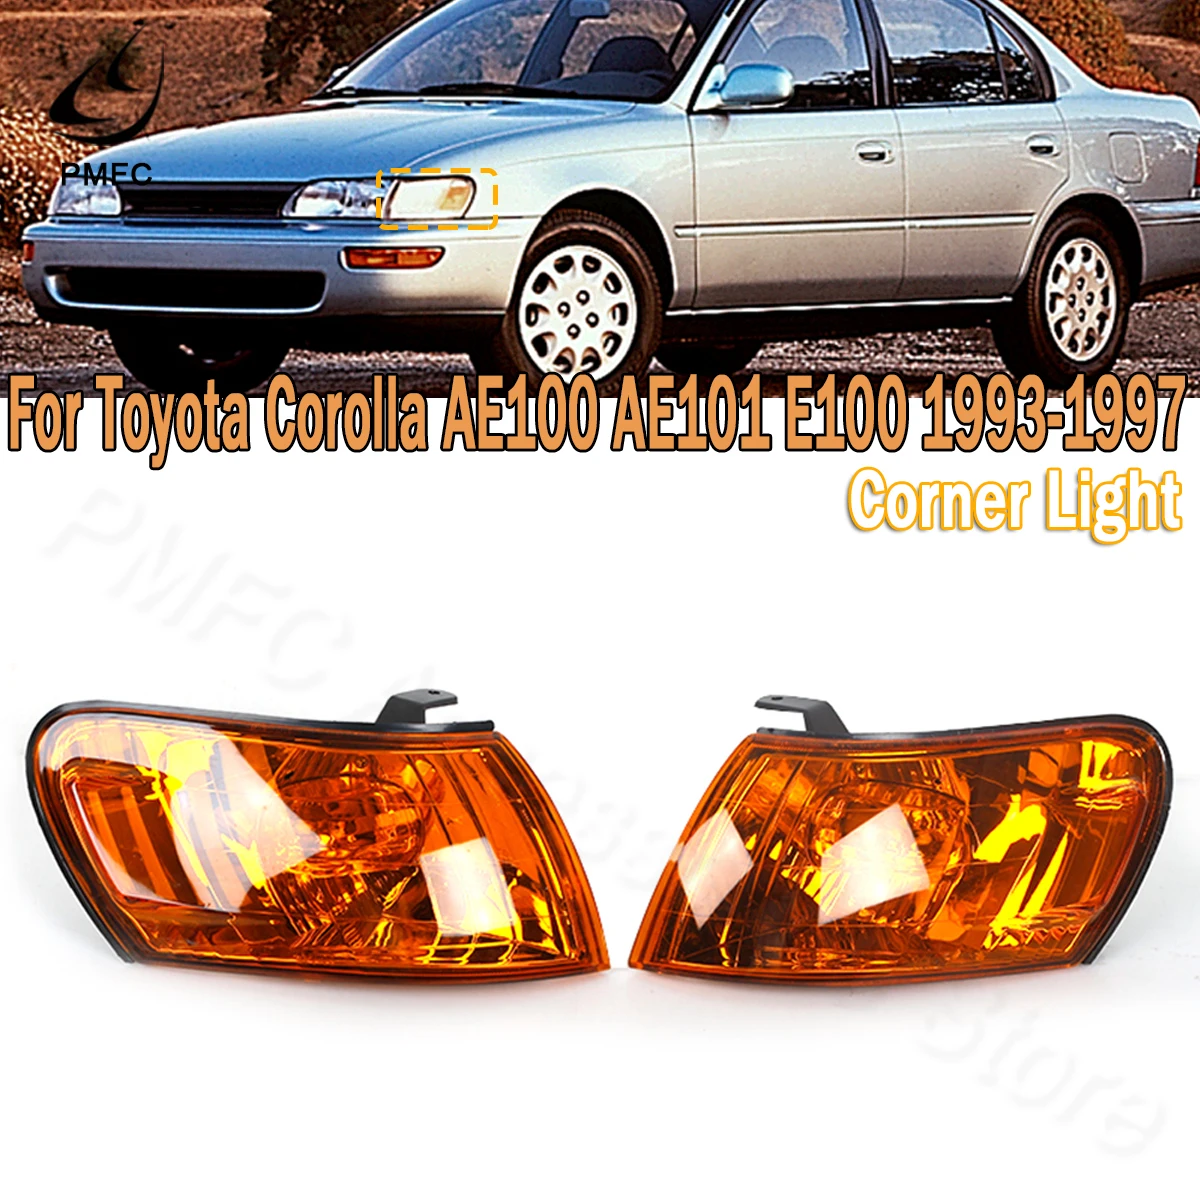 

PMFC Front Signal Corner Light Cover Amber Lens Turn Signal Lamp For Toyota Corolla AE100 AE101 E100 1993 1994 1995 1996 1997